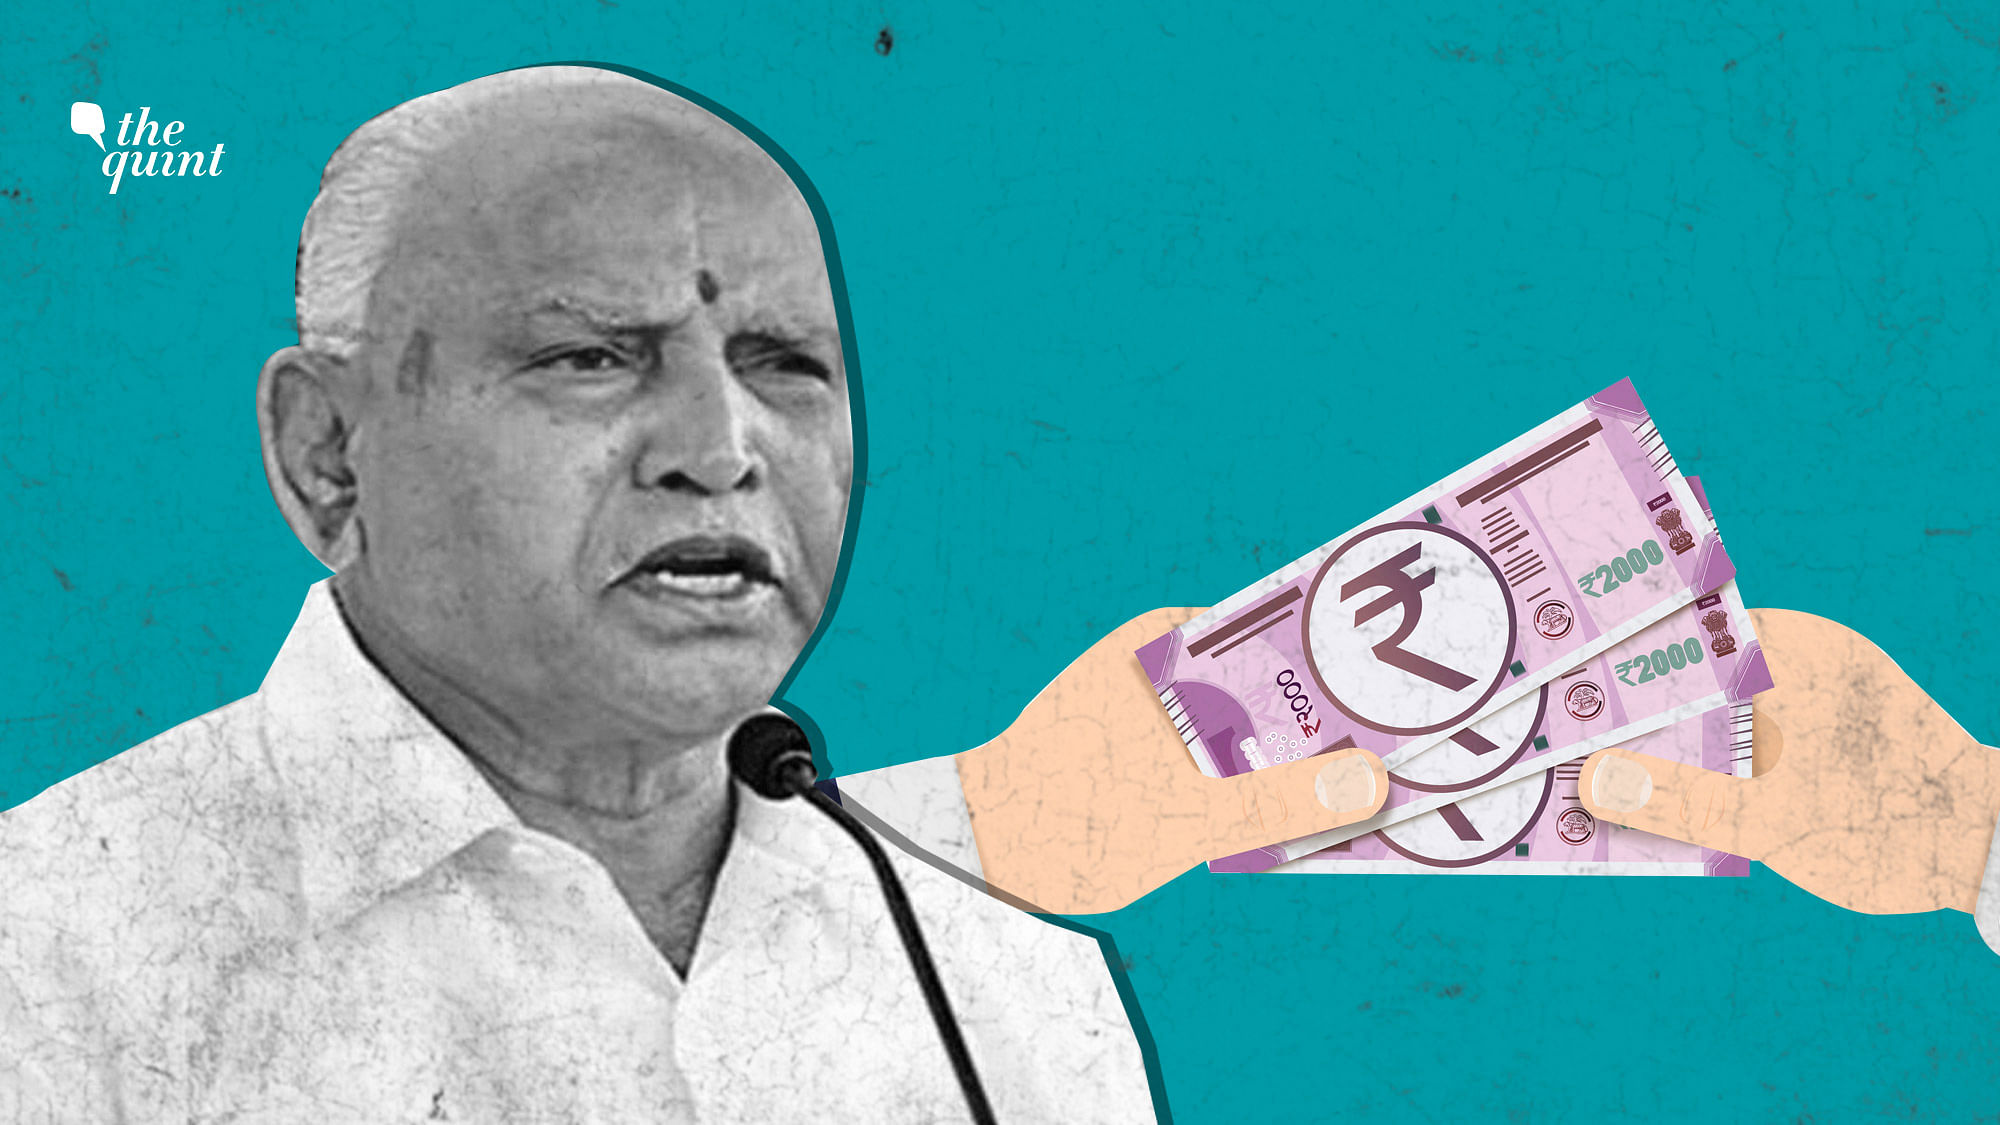 A private complaint is now lodged with a special court in Bengaluru accusing Karnataka CM BS Yediyurappa and his family of money laundering.&nbsp;